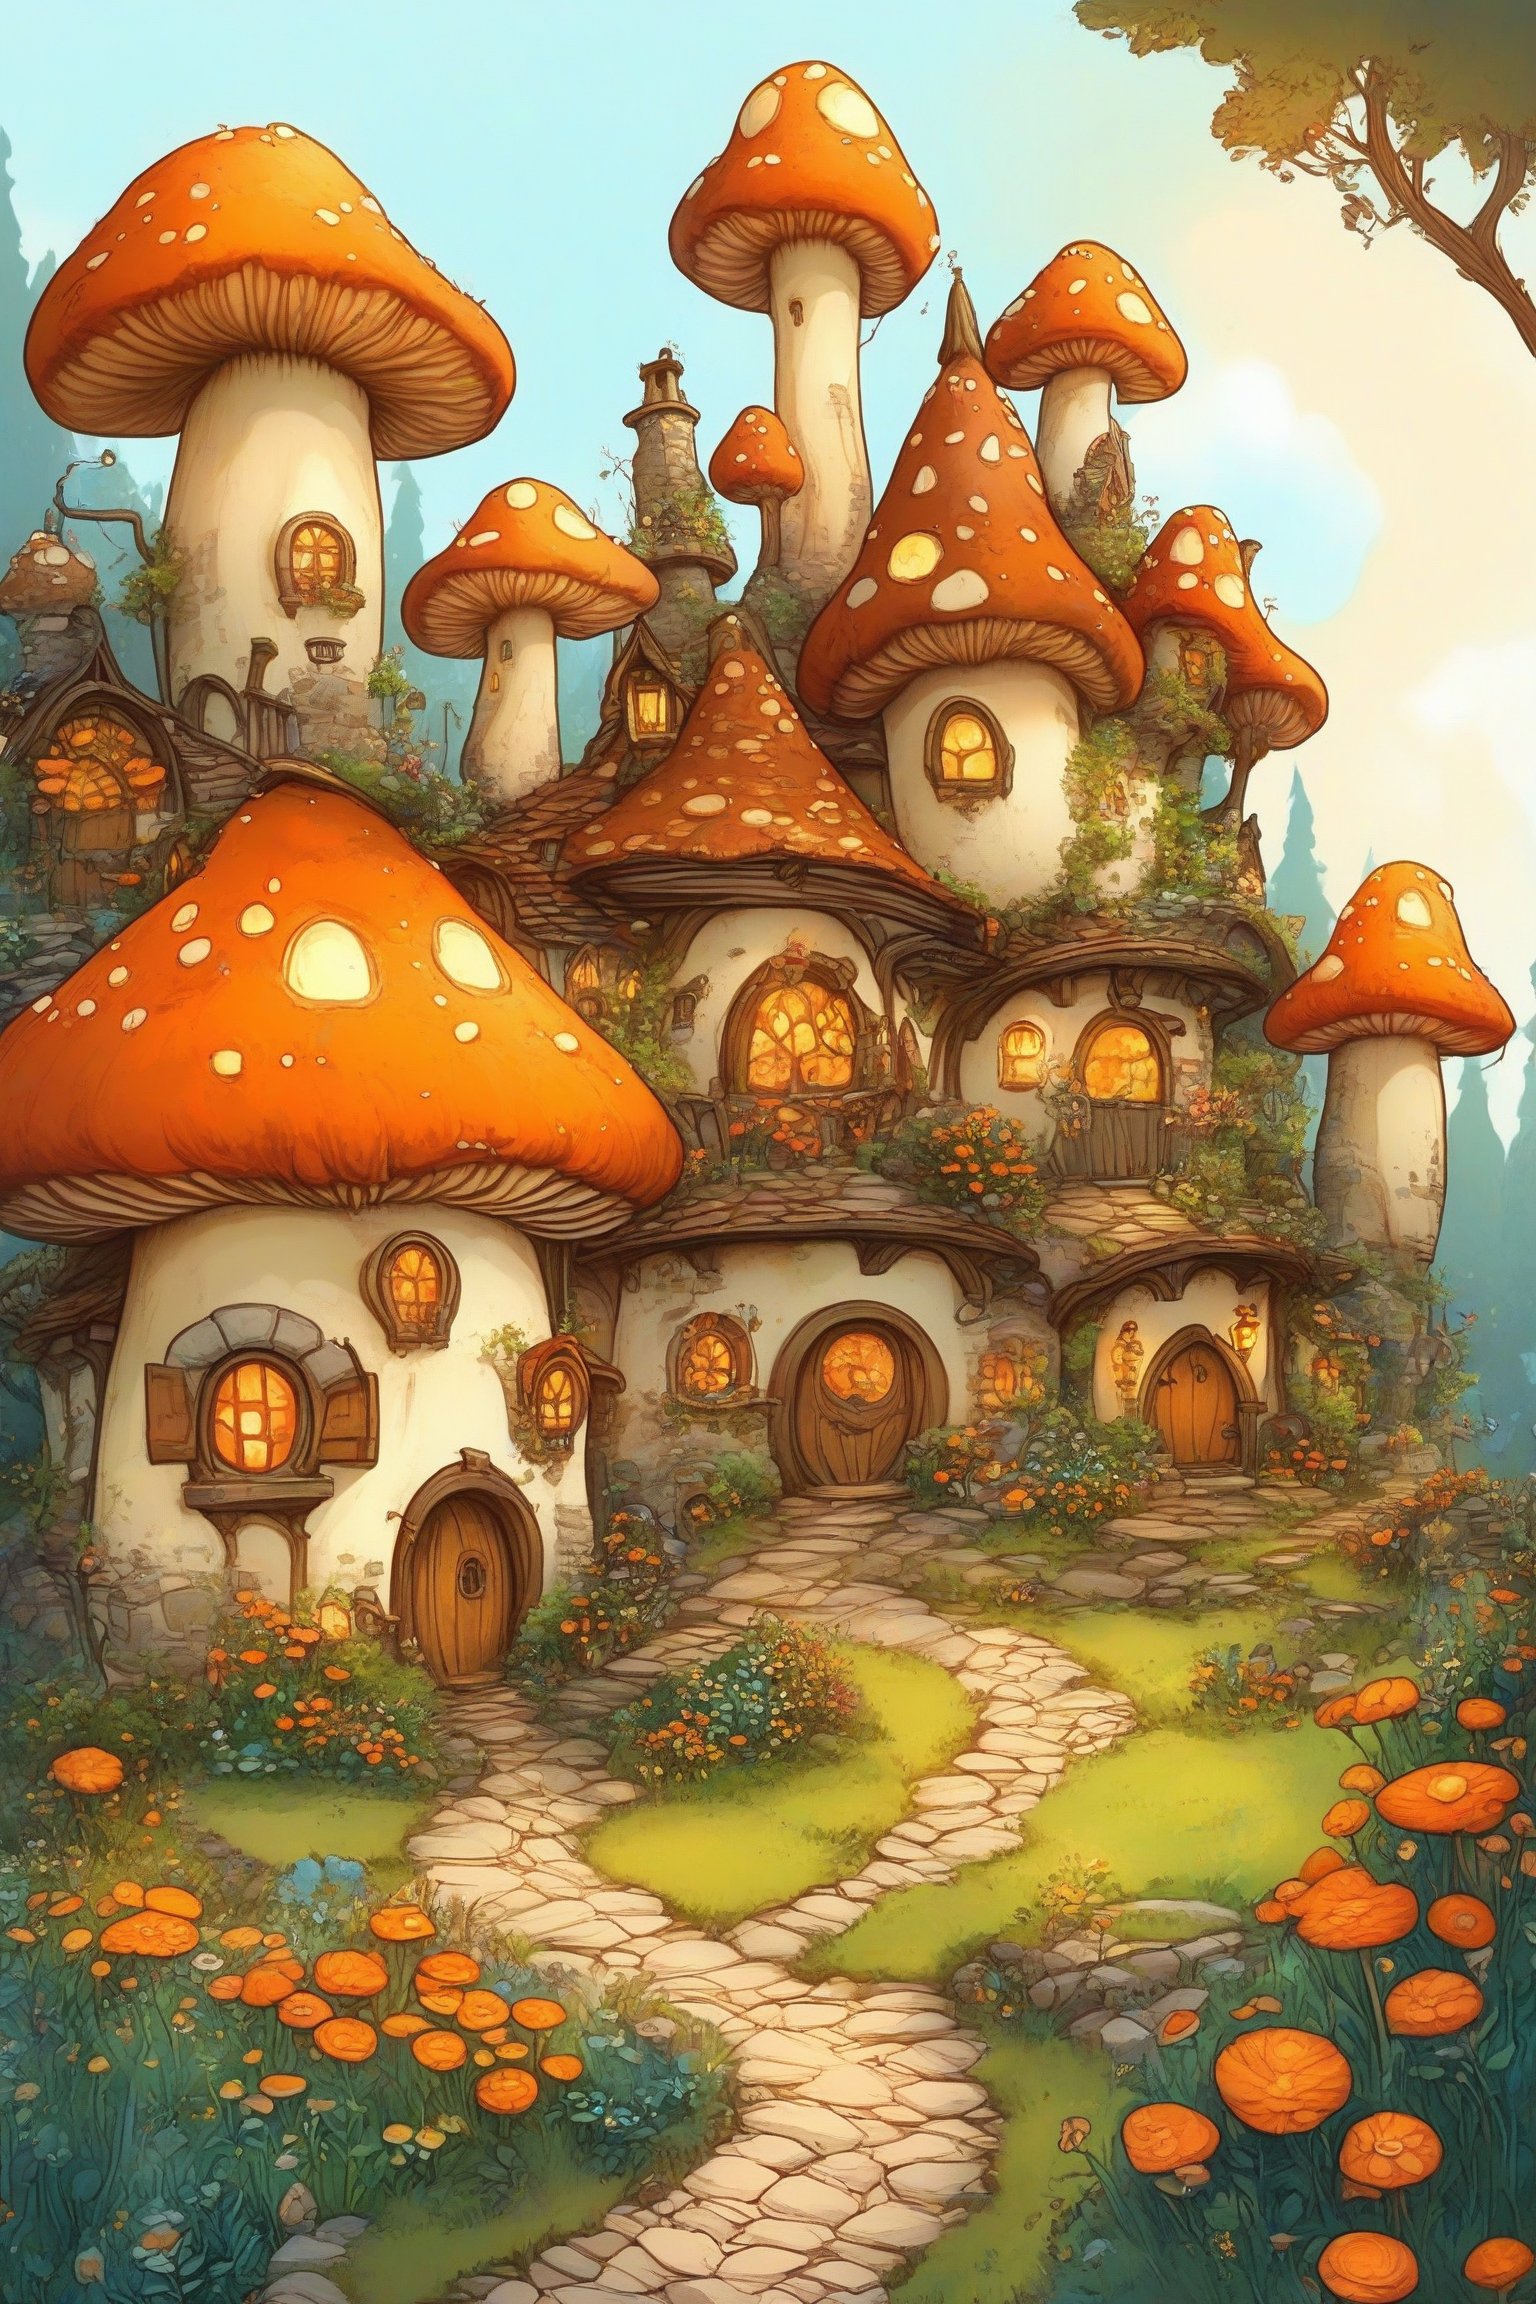 A whimsical village nestled among trees and flora. The houses are designed to resemble large mushrooms, with each having distinct windows, doors, and architectural features. The mushroom houses are connected by a cobblestone pathway, and the surroundings are adorned with vibrant flowers, trees, and other vegetation. The color palette is warm, with dominant hues of orange, brown, and green, creating a serene and enchanting atmosphere.